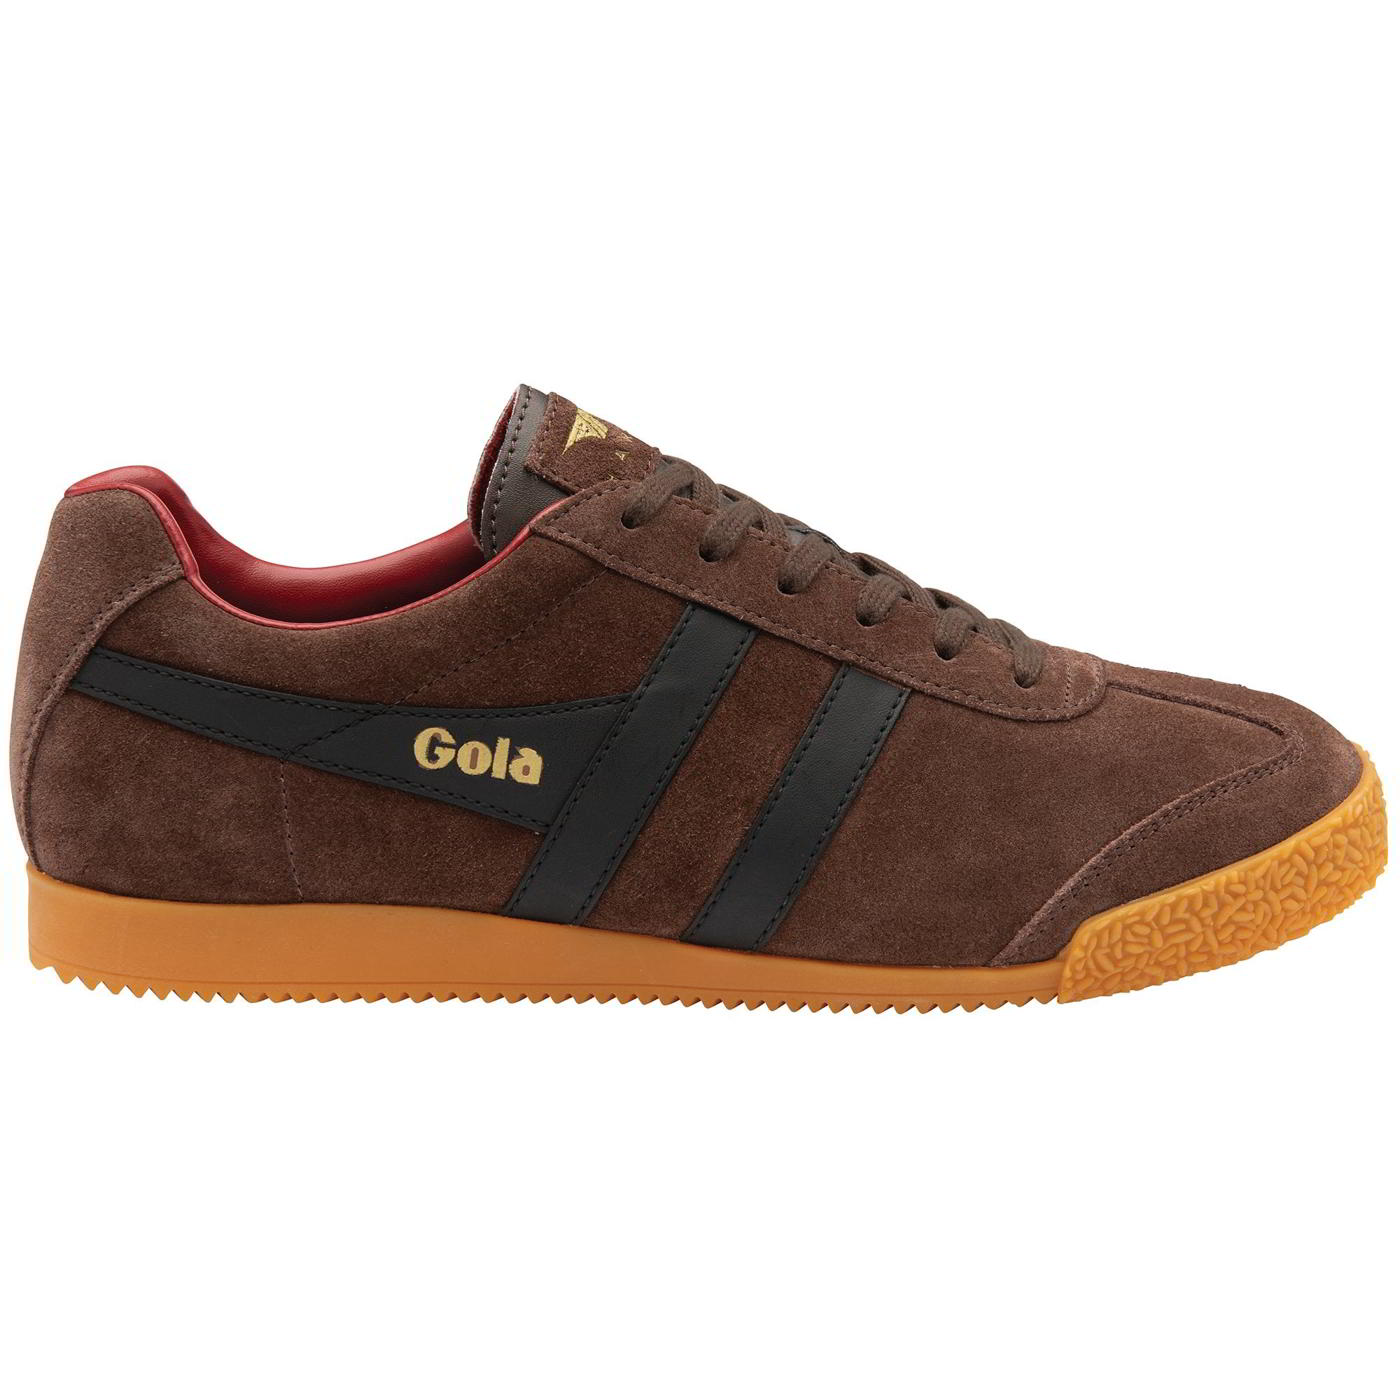 Gola Mens Harrier Suede Trainers Shoes - UK 8 Brown 2951